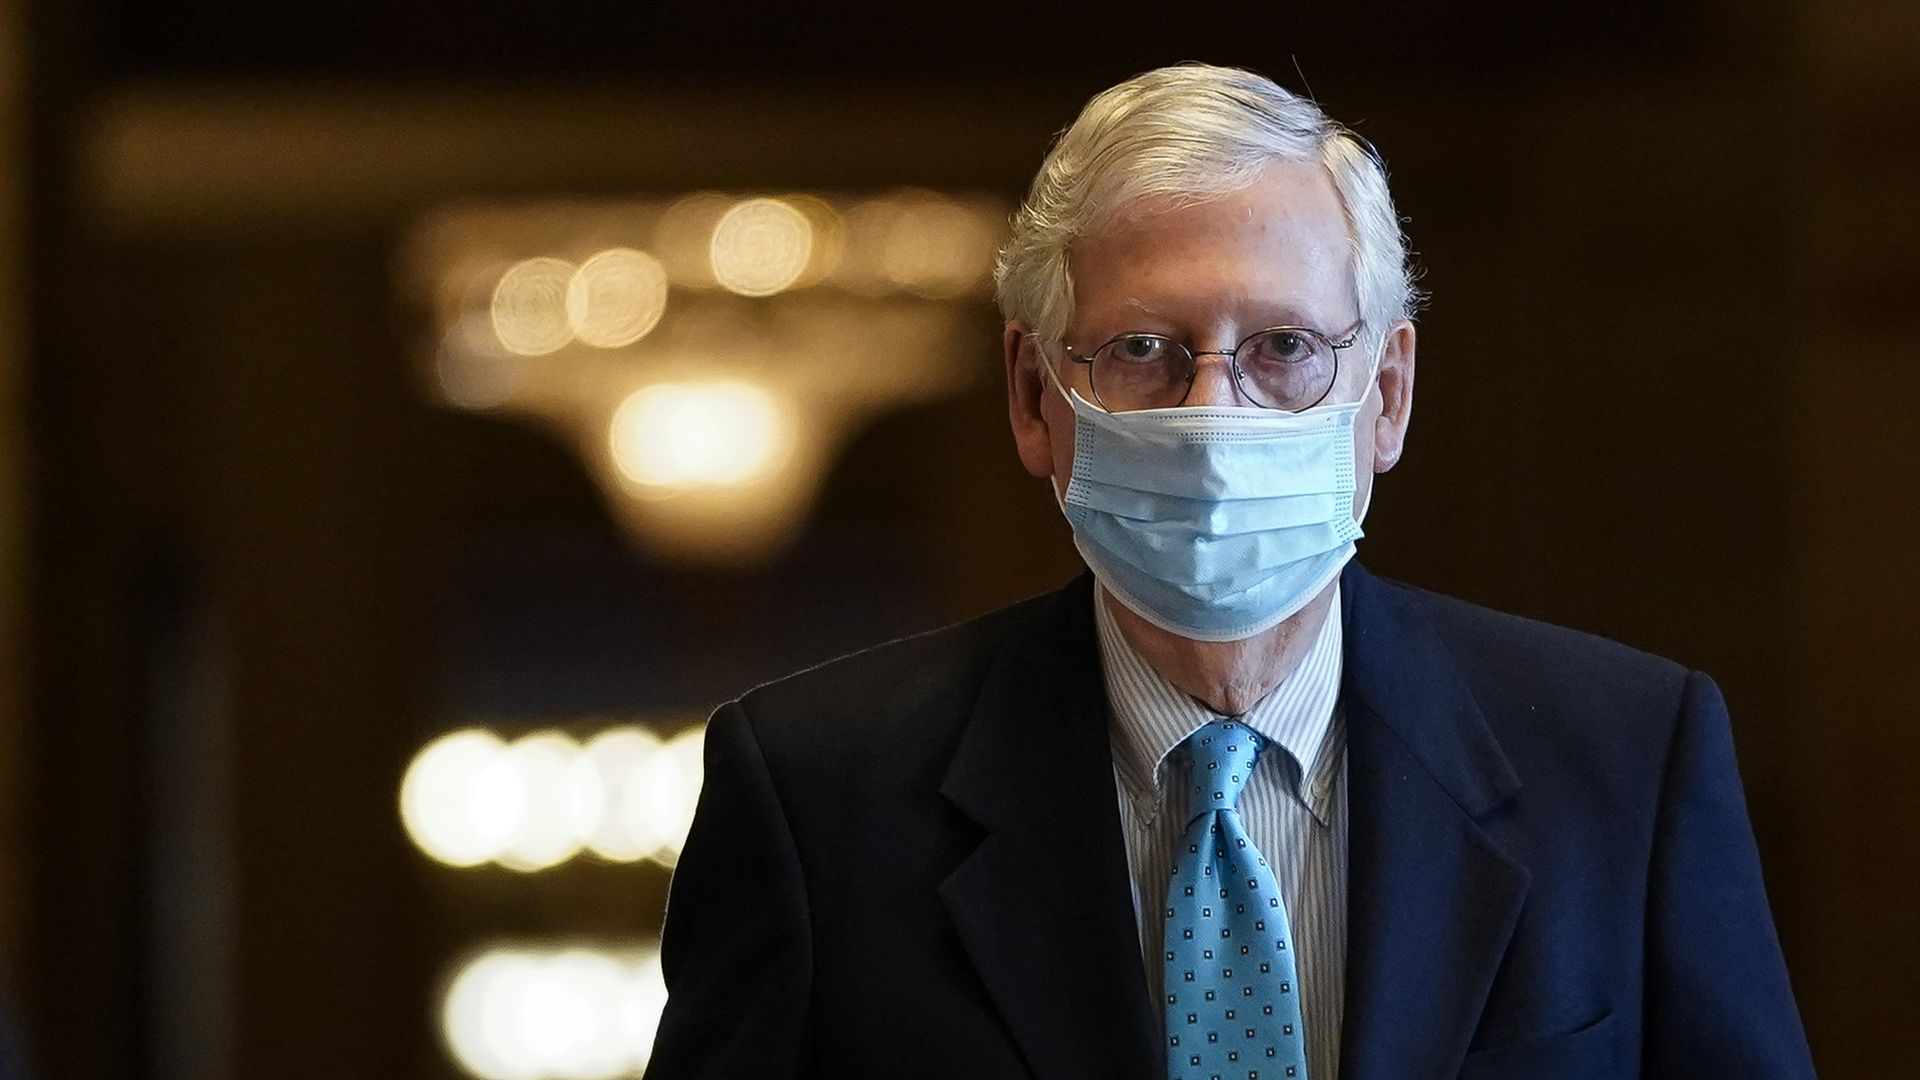 Senate Minority Leader Mitch McConnell (R-KY) leaves his office and walks to the Senate floor at the U.S. Capitol on February 8